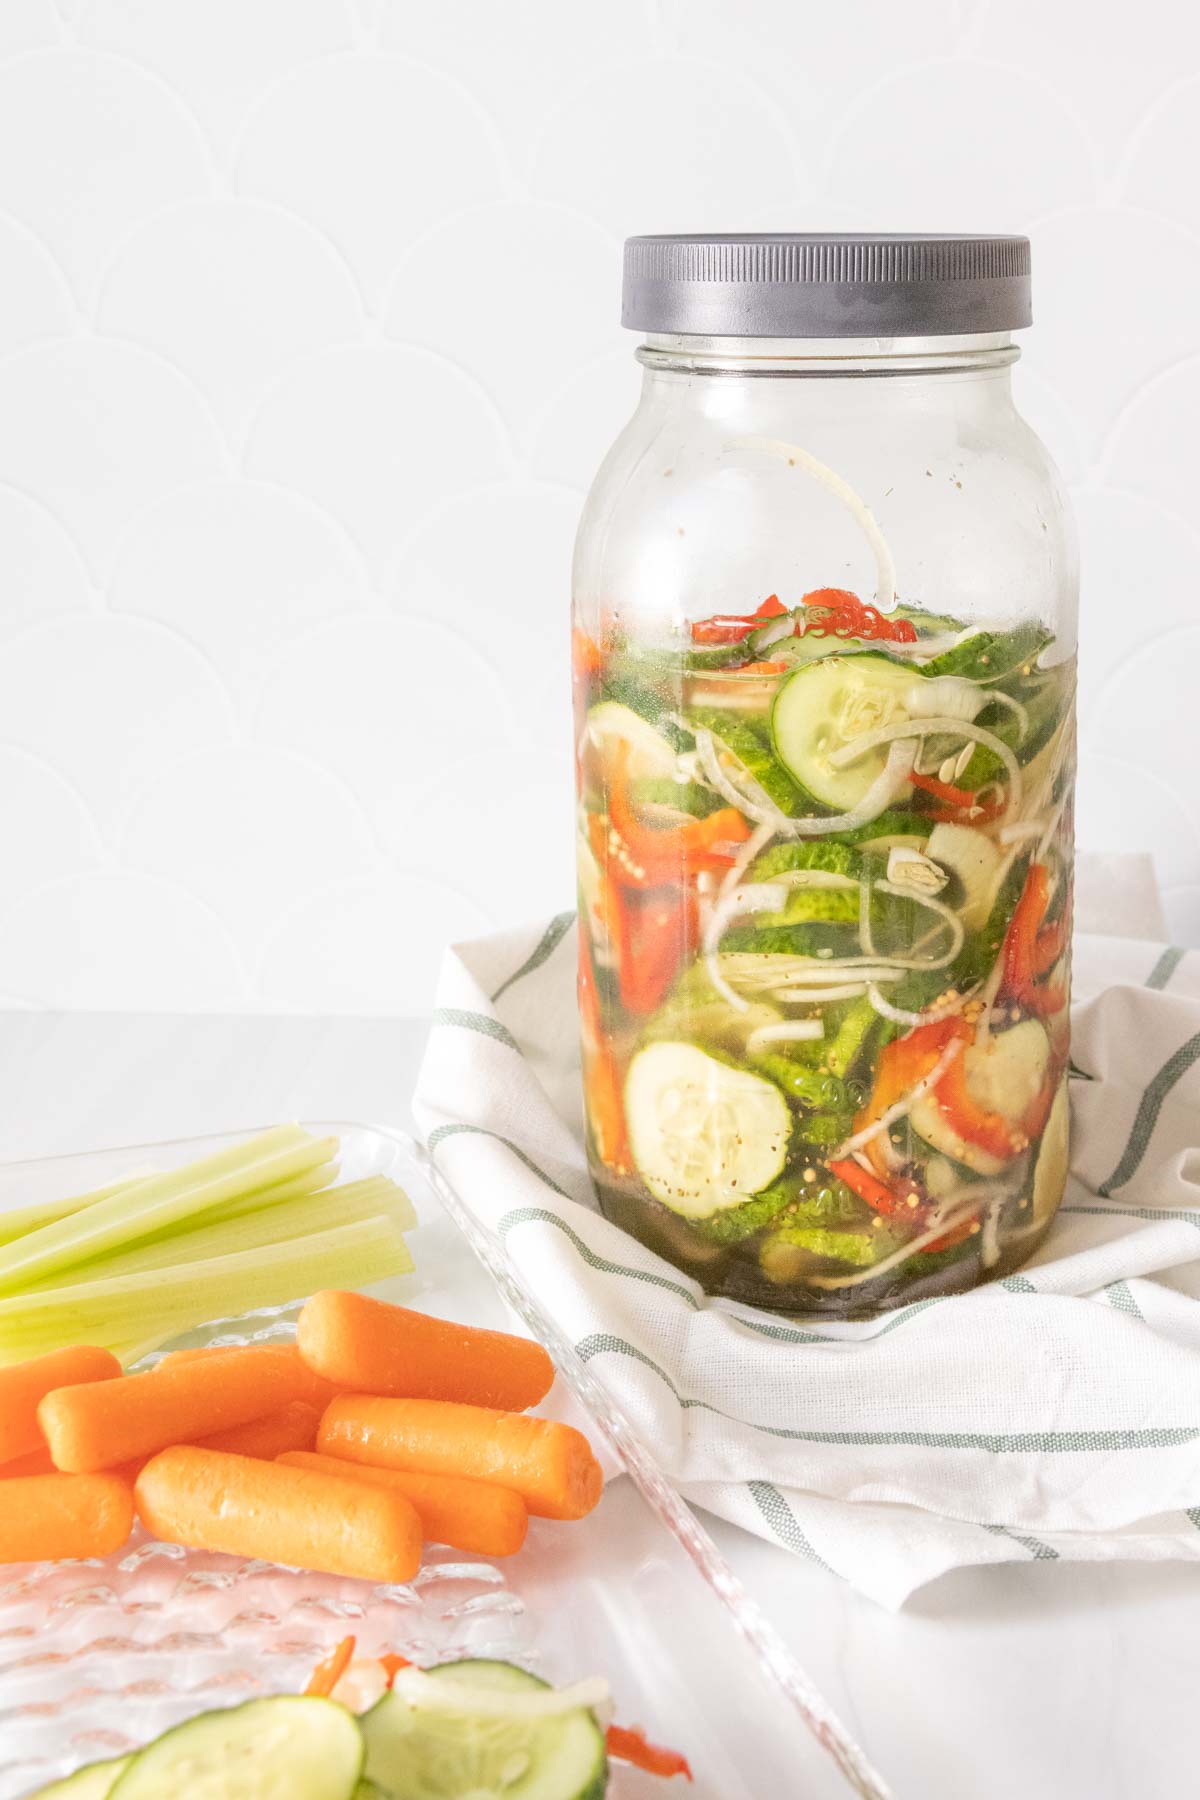 A jar of pickled vegetables with carrots and cucumbers.